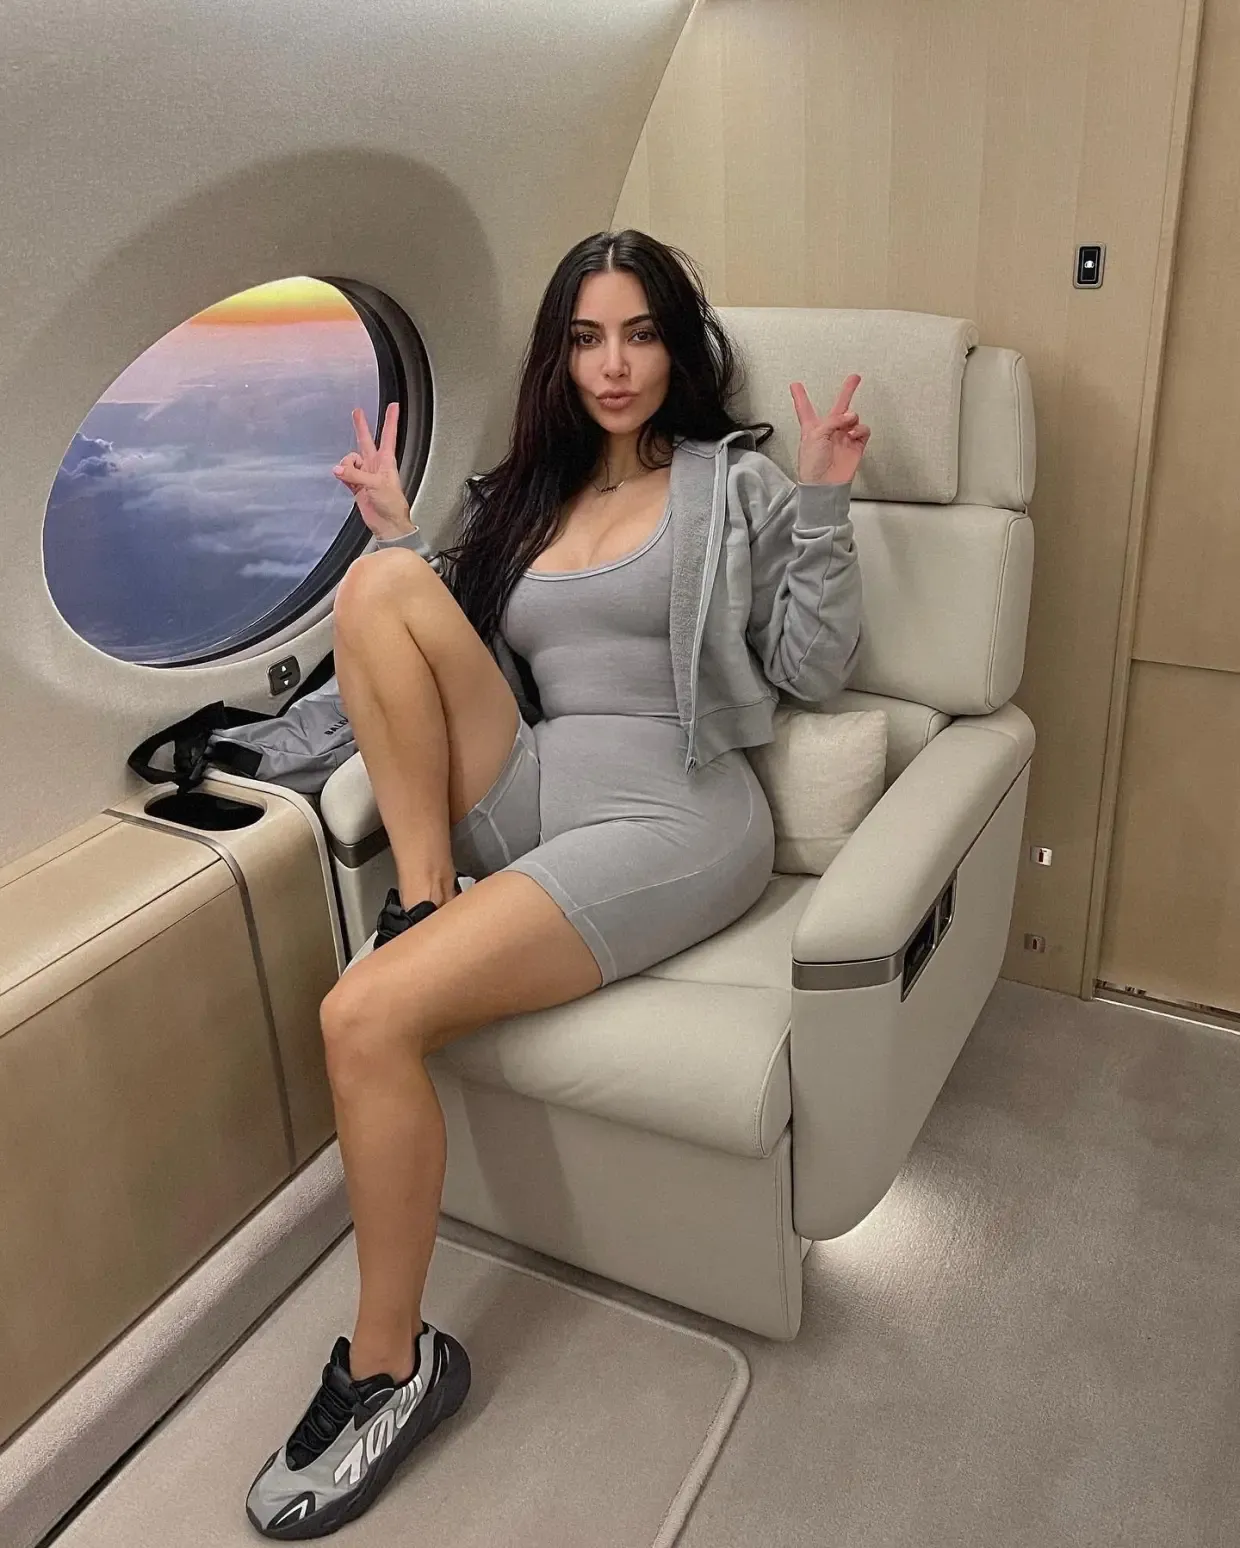 NOT SO SWEET Kim Kardashian takes private jet to Paris for ‘slice of cheesecake’ as critics call her ‘spoiled celebrity’